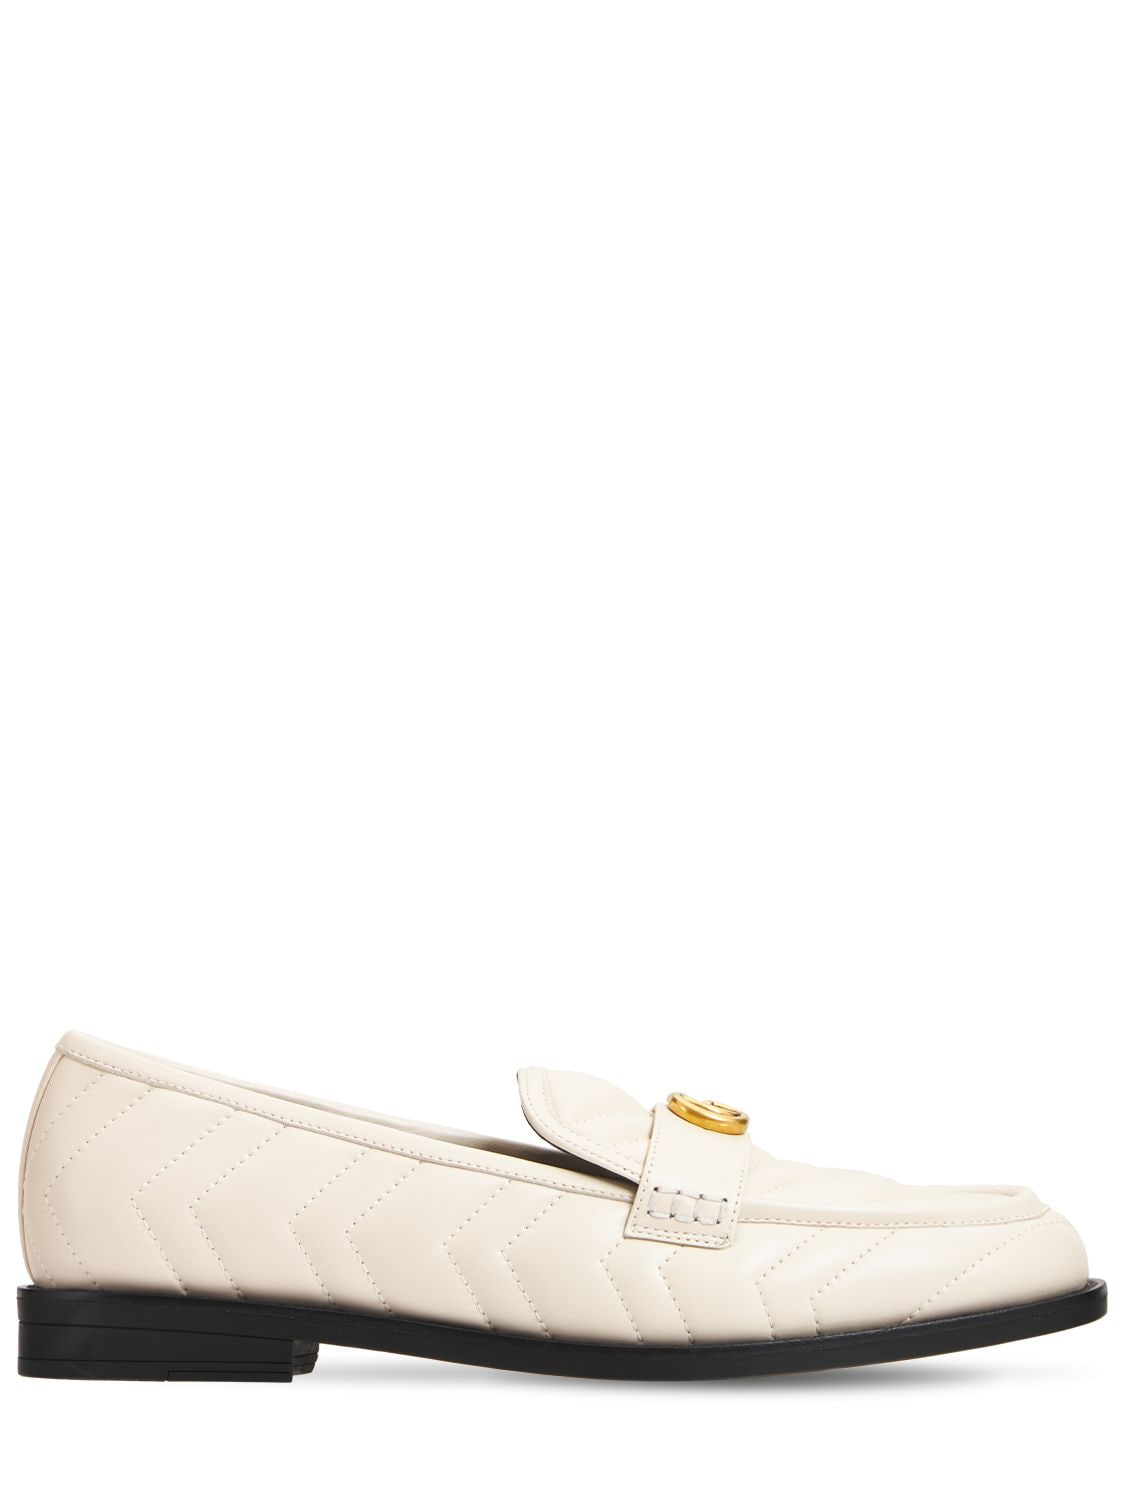 GUCCI 15mm Marmont Matelassé Leather Loafers